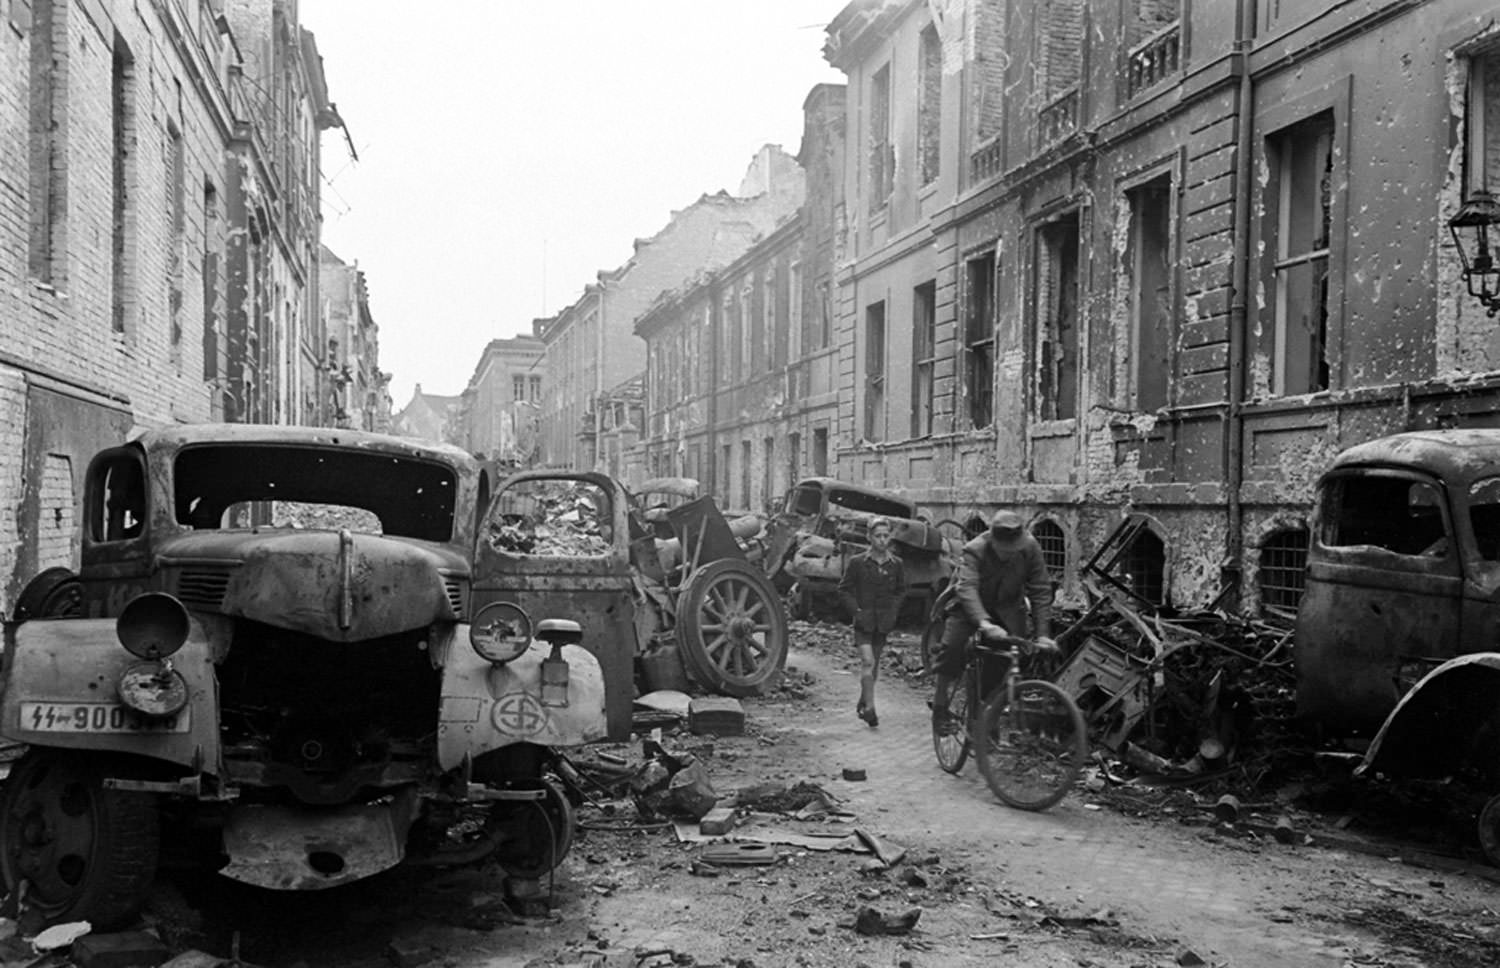 Oberwallstrasse, in central Berlin, saw some of the most vicious fighting between German and Soviet troops in the spring of 1945.